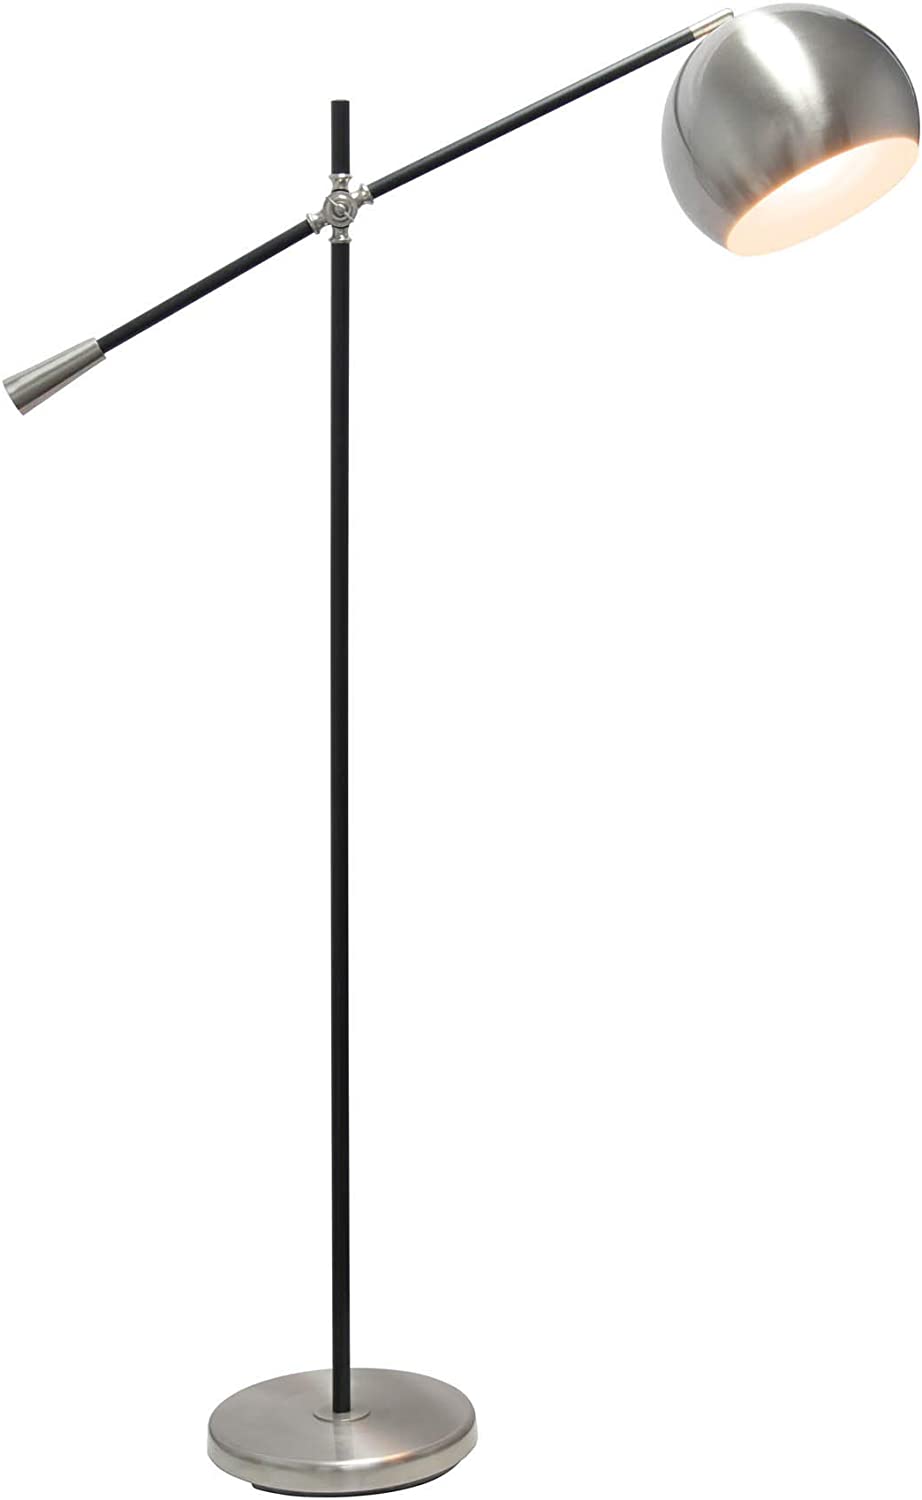 Lalia Home Decorative Black Matte Swivel Floor Lamp with Inner White Dome Shade, Brushed Nickel